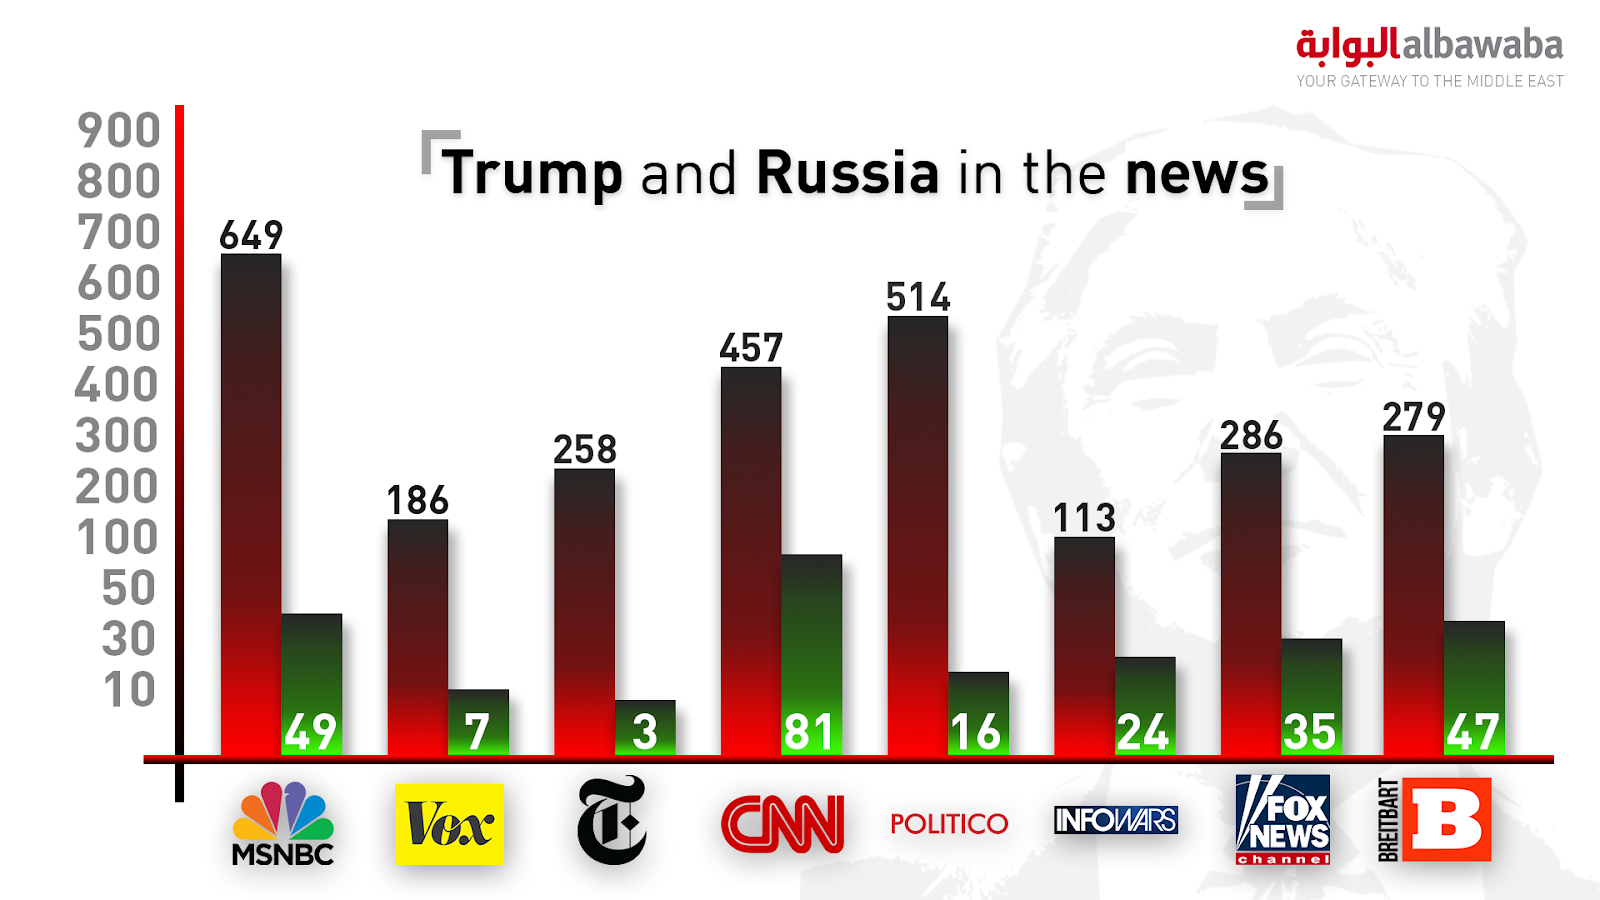 Table showing total stories published on Trump, Russia and collusion (Rami Khoury/Al Bawaba)